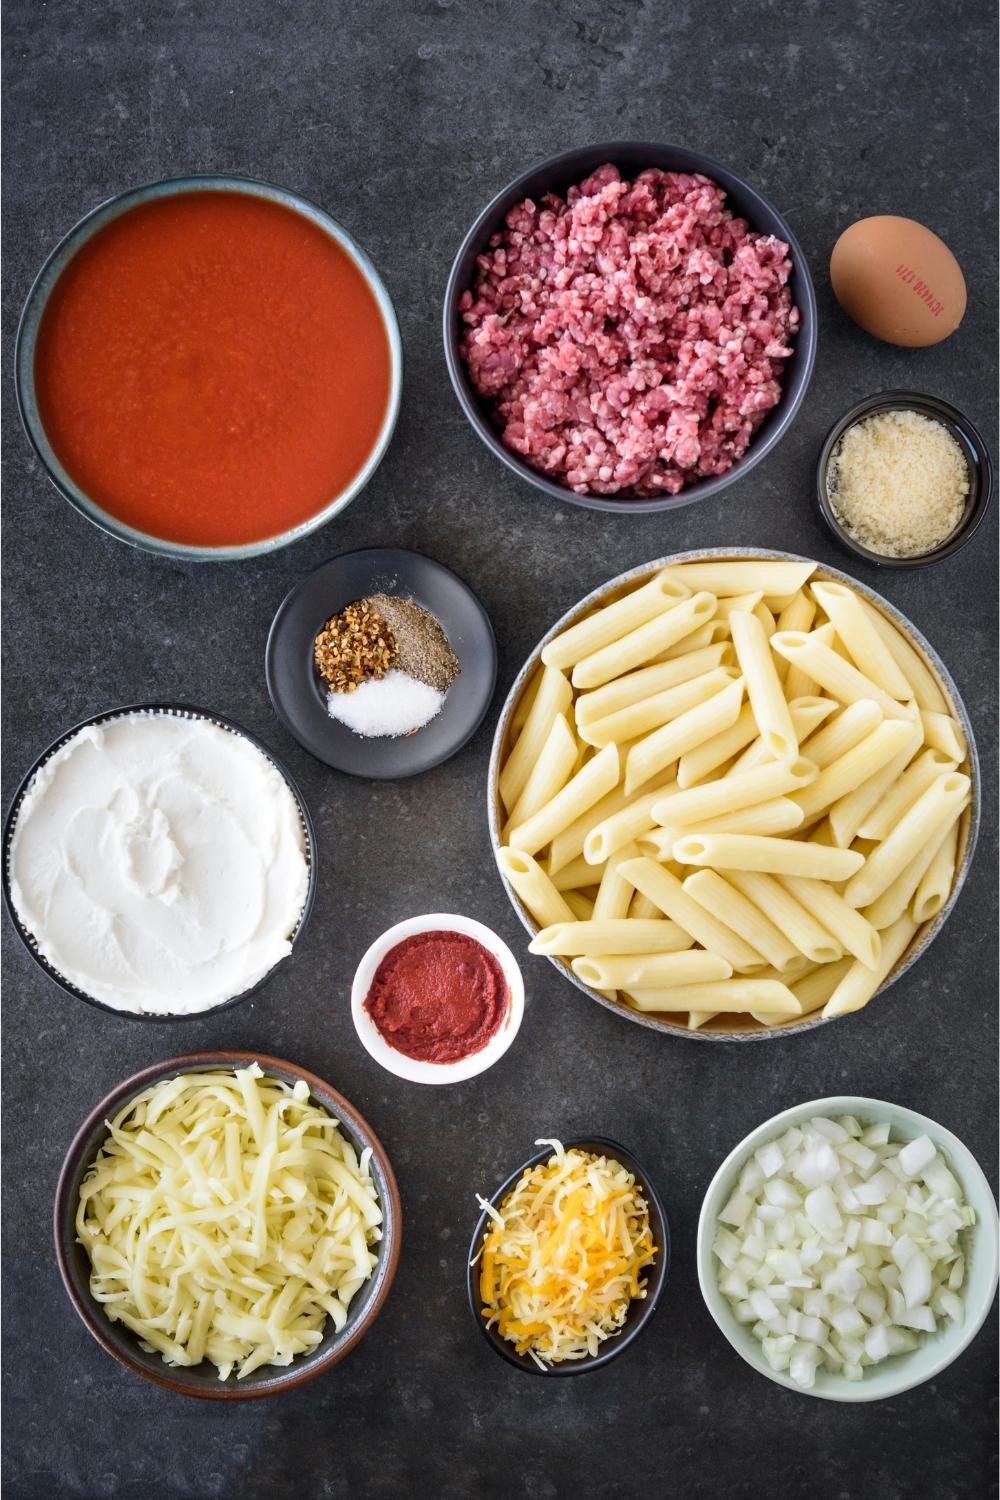 A countertop with tomato sauce, beef, and egg, parmesan cheese, seasoning, ricotta cheese, pasta noodles, tomato paste, shredded cheeses, and minced onion in separate bowls.